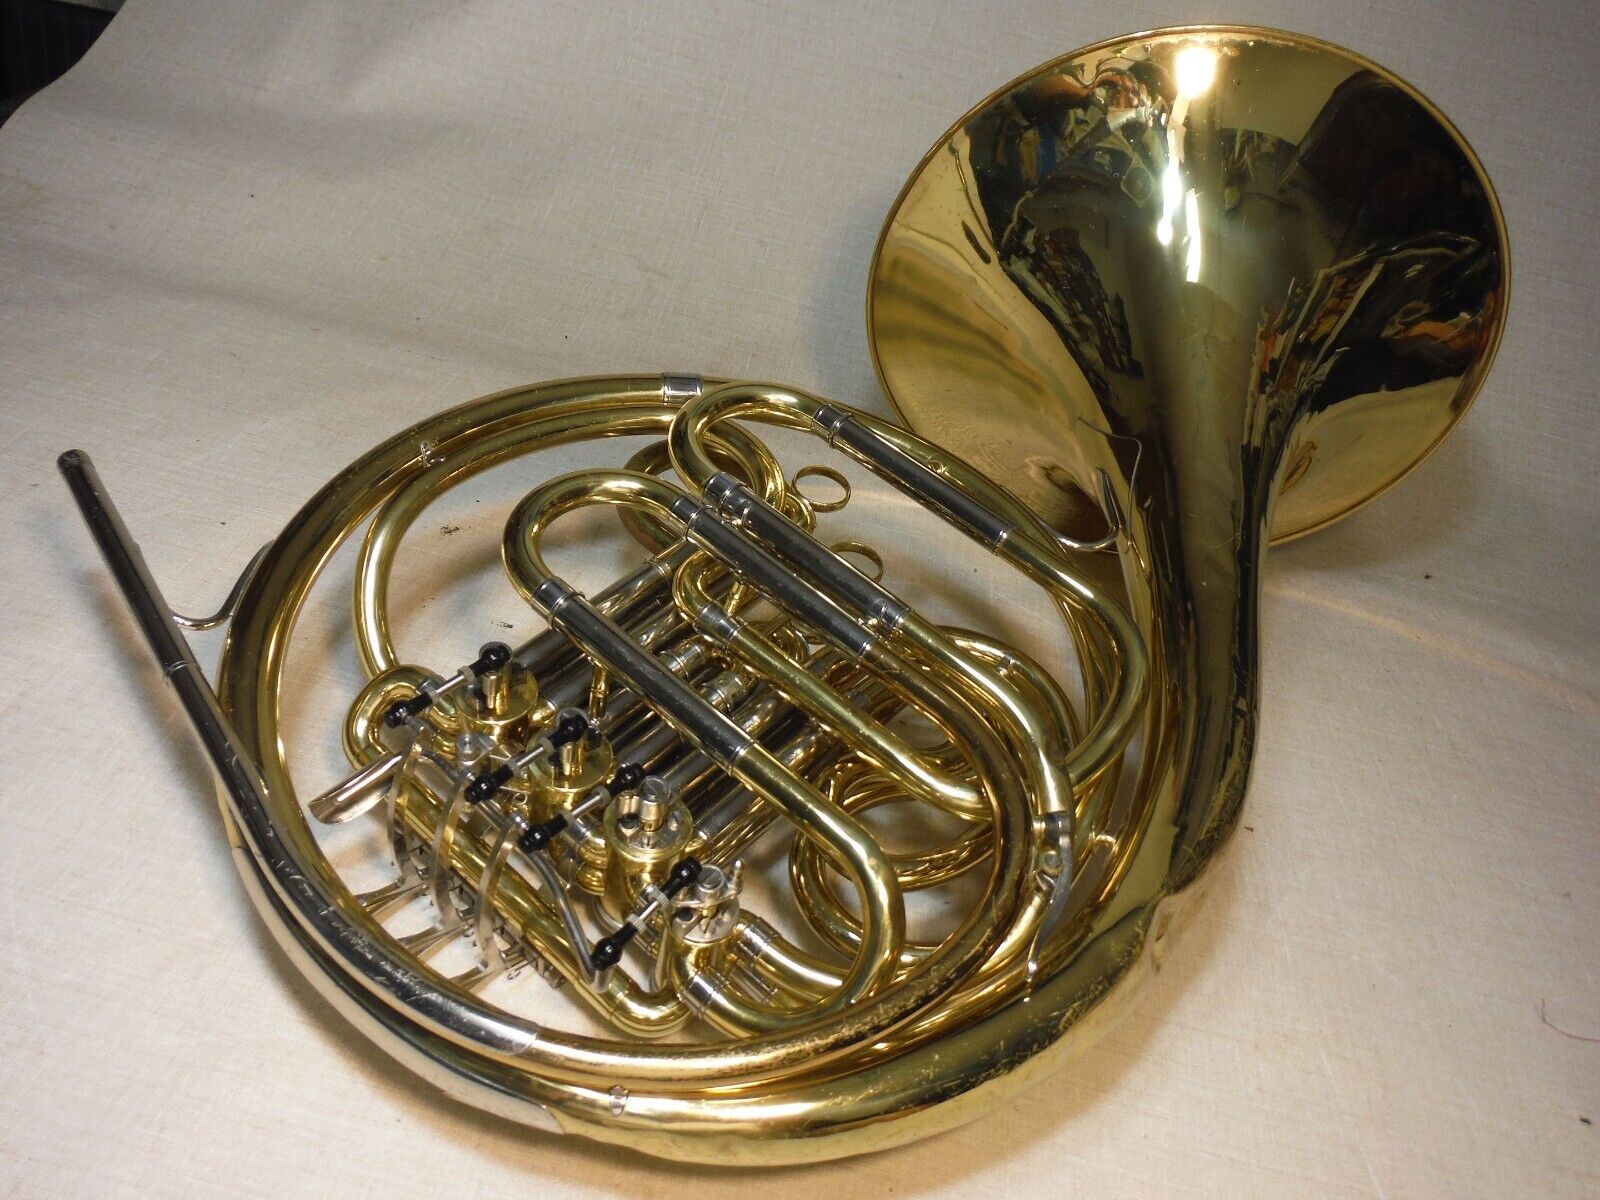 JUPITER JHR-852 DOUBLE FRENCH HORN BRASS WORKING GOOD W/DENTS CASE MOUTHPIECE 18